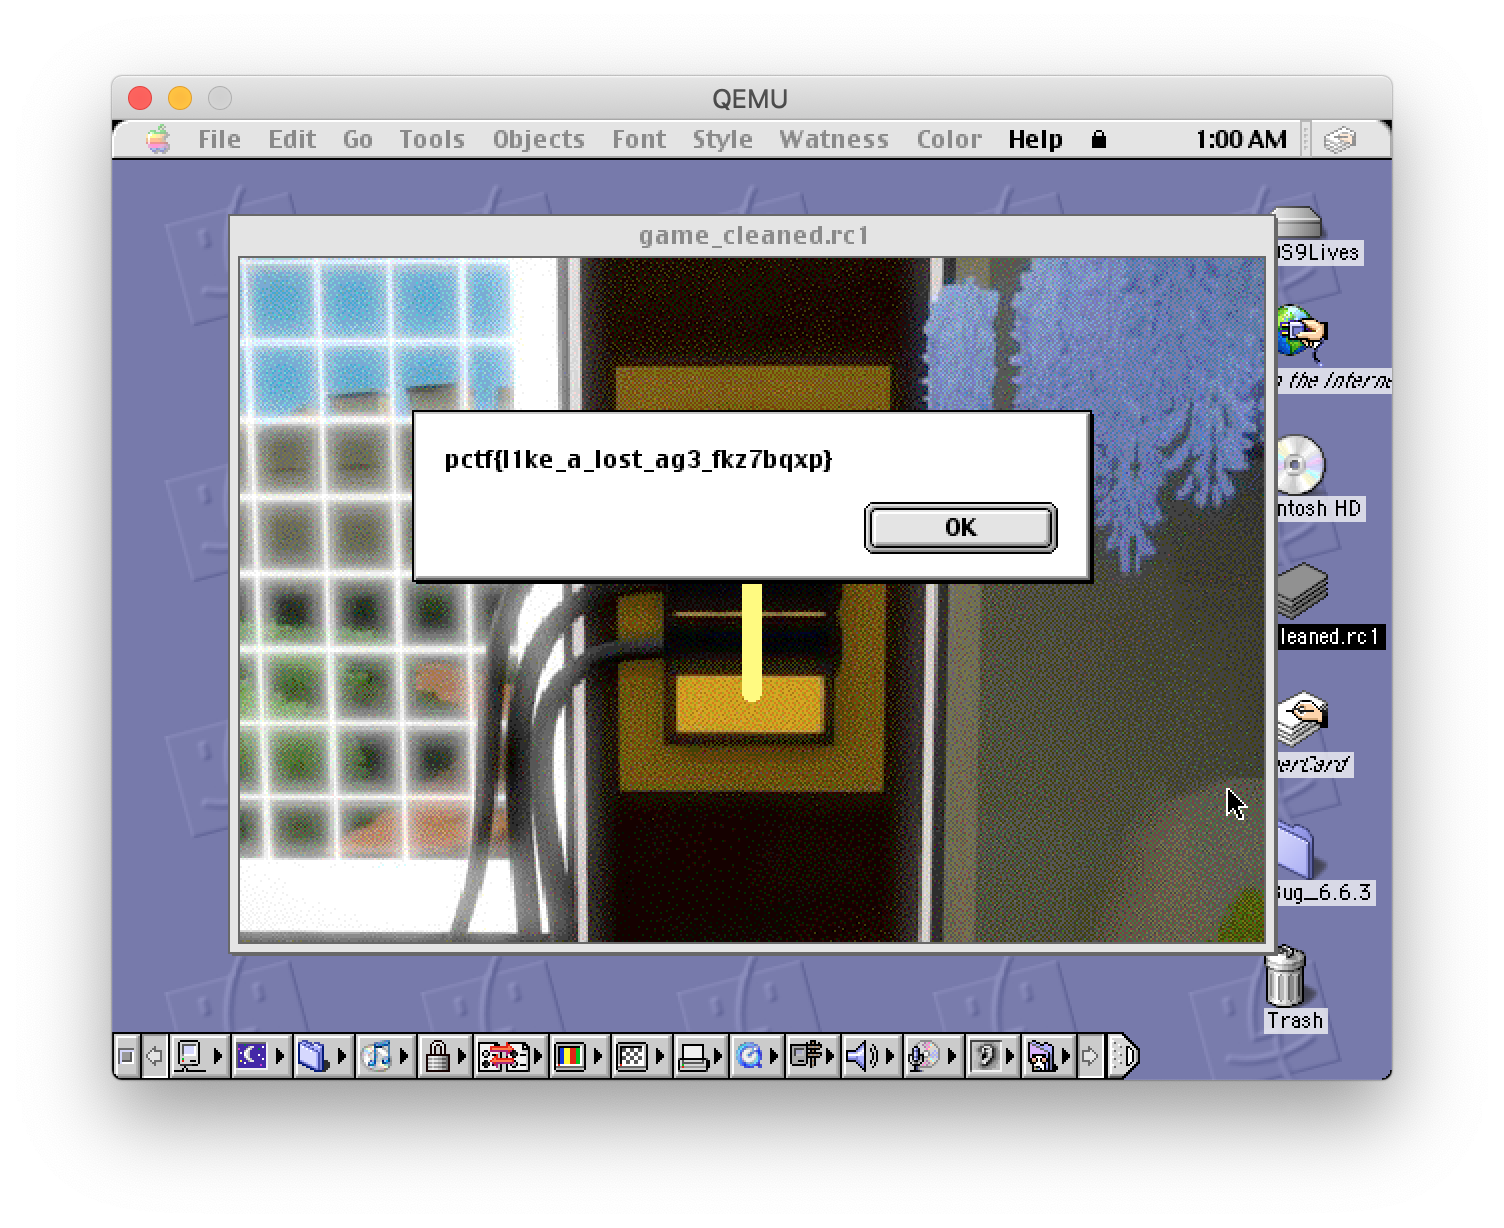 HyperCard running on QEMU showing the flag for The Watness 2